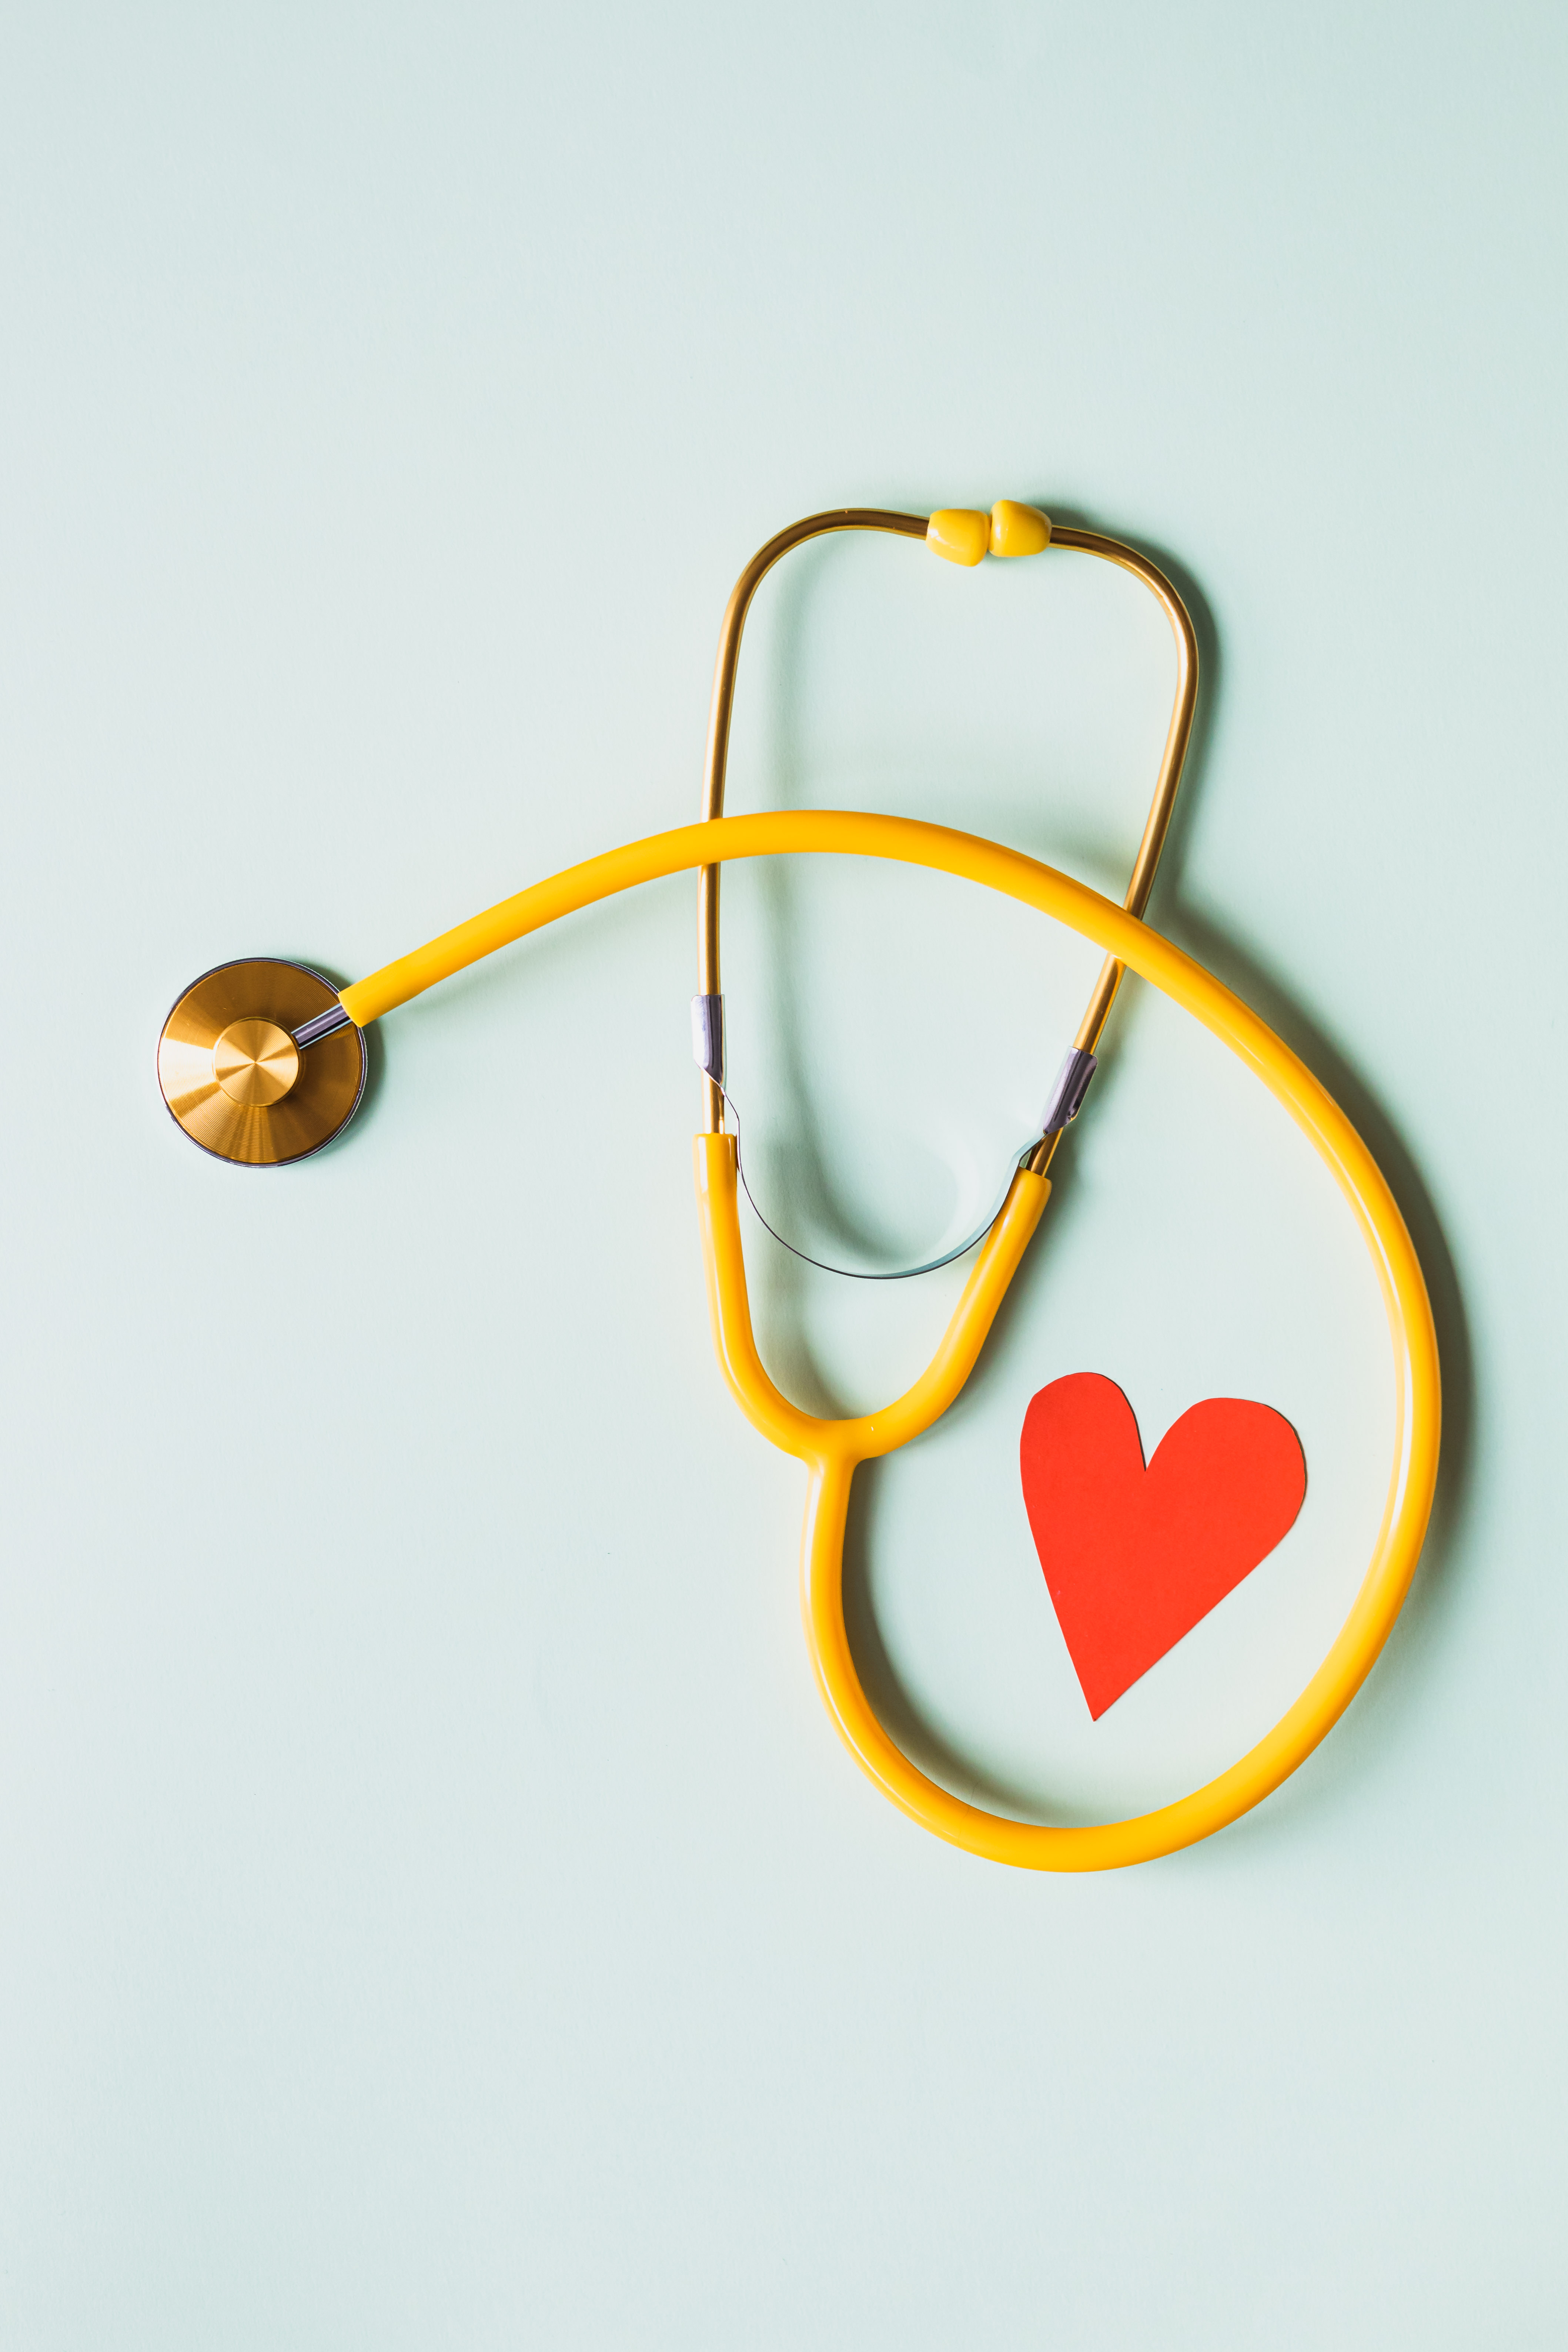 Medical stethoscope with red paper heart on white surface · Free